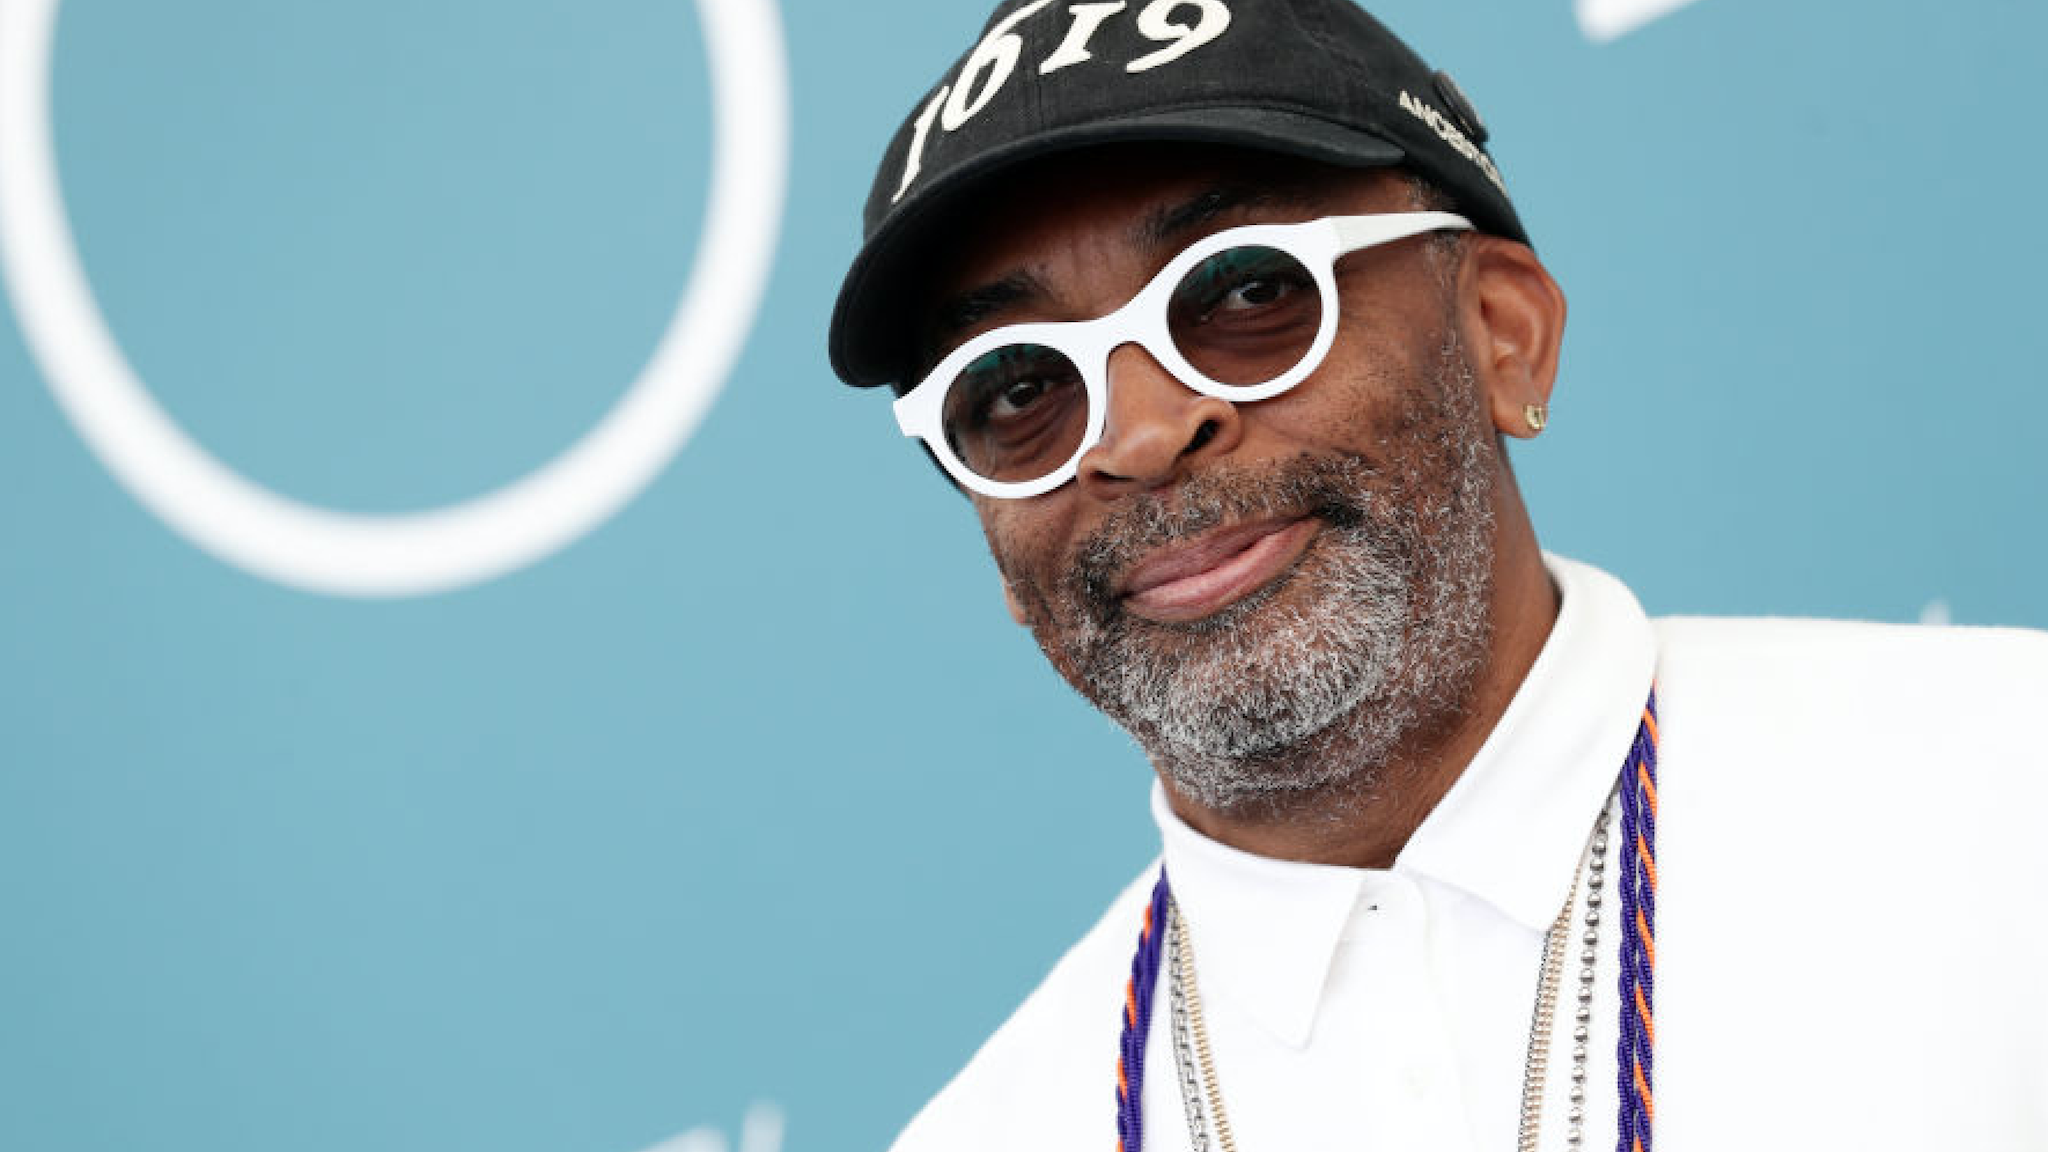 Spike Lee attends "American Skin" photocall during the 76th Venice Film Festival at Sala Grande on September 01, 2019 in Venice, Italy.